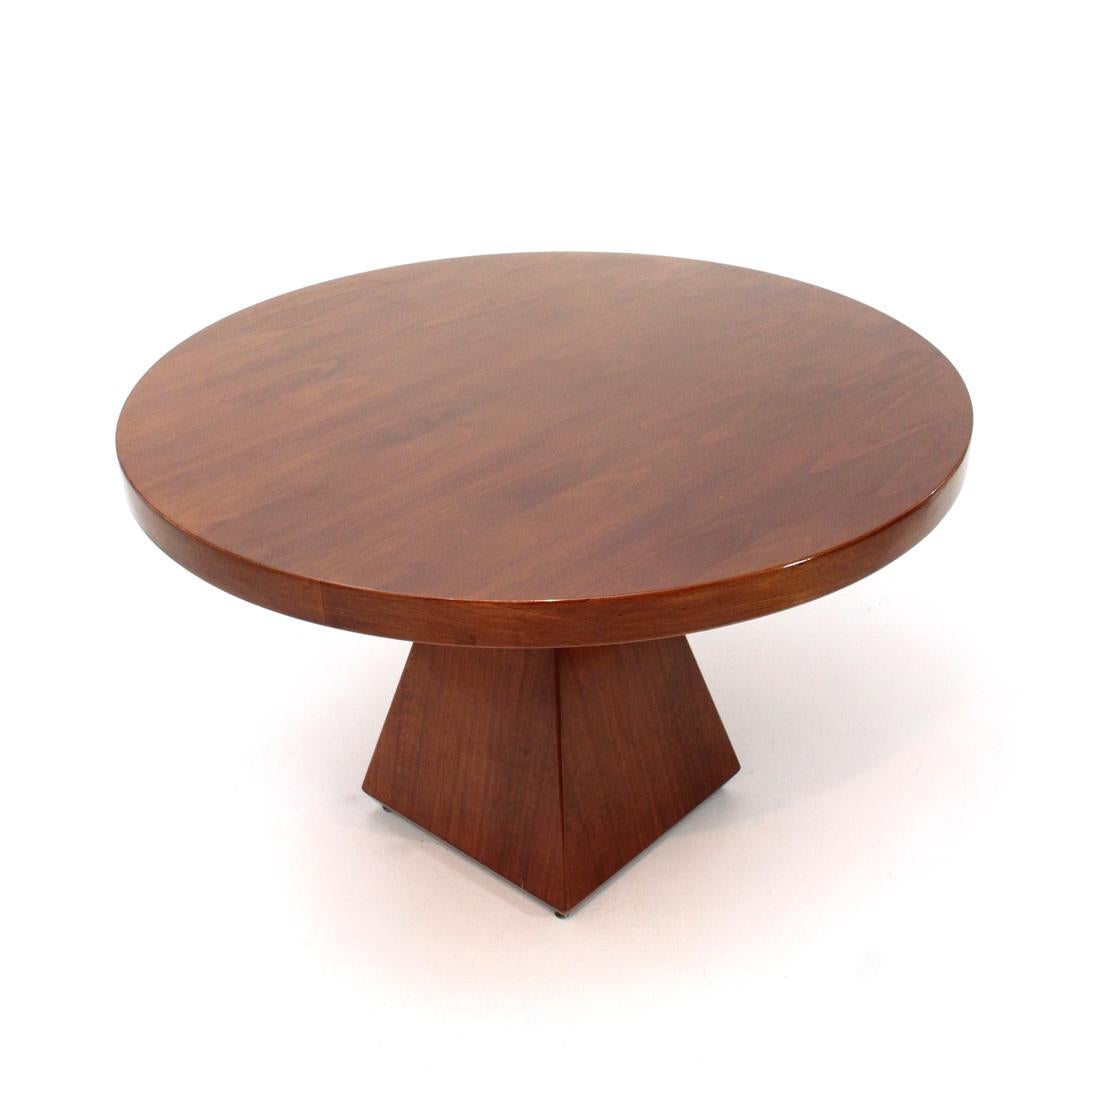 Dining table designed by Vittorio Introini and produced by Saporiti in the 1970s.
Circular wood veneer top.
Pyramid-shaped base in veneered wood.
Good general conditions, some signs due to normal use over time.

Dimensions: Diameter 120 cm,